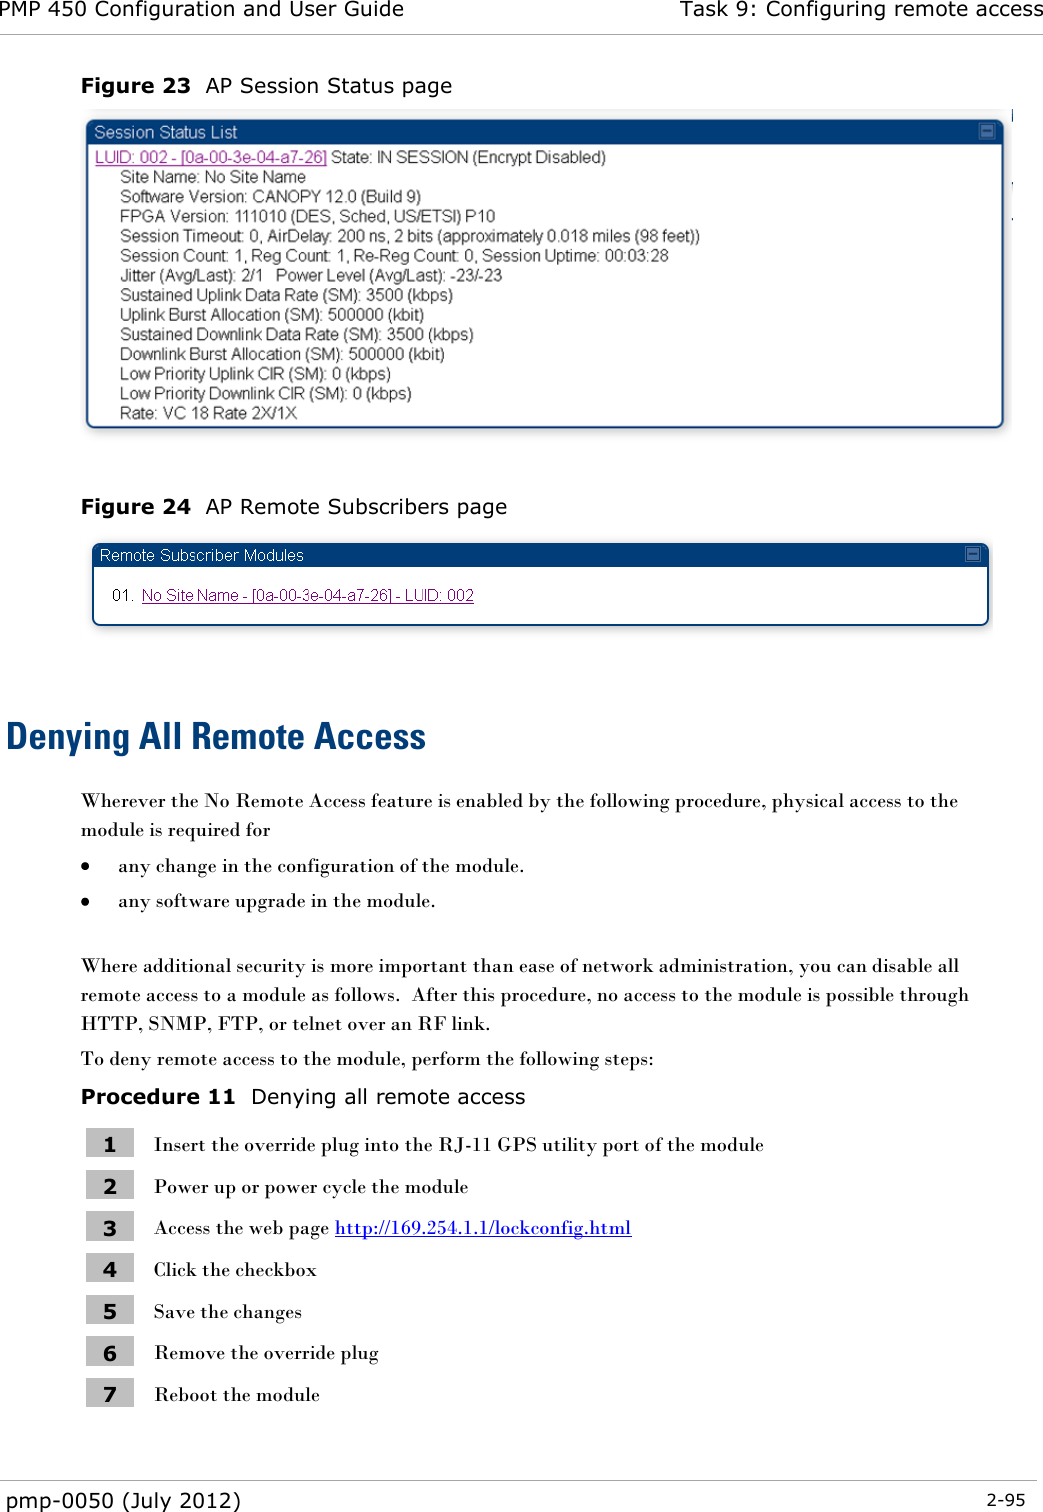 PMP 450 Configuration and User Guide Task 9: Configuring remote access  pmp-0050 (July 2012)  2-95  Figure 23  AP Session Status page   Figure 24  AP Remote Subscribers page   Denying All Remote Access Wherever the No Remote Access feature is enabled by the following procedure, physical access to the module is required for   any change in the configuration of the module.  any software upgrade in the module.  Where additional security is more important than ease of network administration, you can disable all remote access to a module as follows.  After this procedure, no access to the module is possible through HTTP, SNMP, FTP, or telnet over an RF link. To deny remote access to the module, perform the following steps: Procedure 11  Denying all remote access 1 Insert the override plug into the RJ-11 GPS utility port of the module 2 Power up or power cycle the module 3 Access the web page http://169.254.1.1/lockconfig.html 4 Click the checkbox 5 Save the changes 6 Remove the override plug 7 Reboot the module  